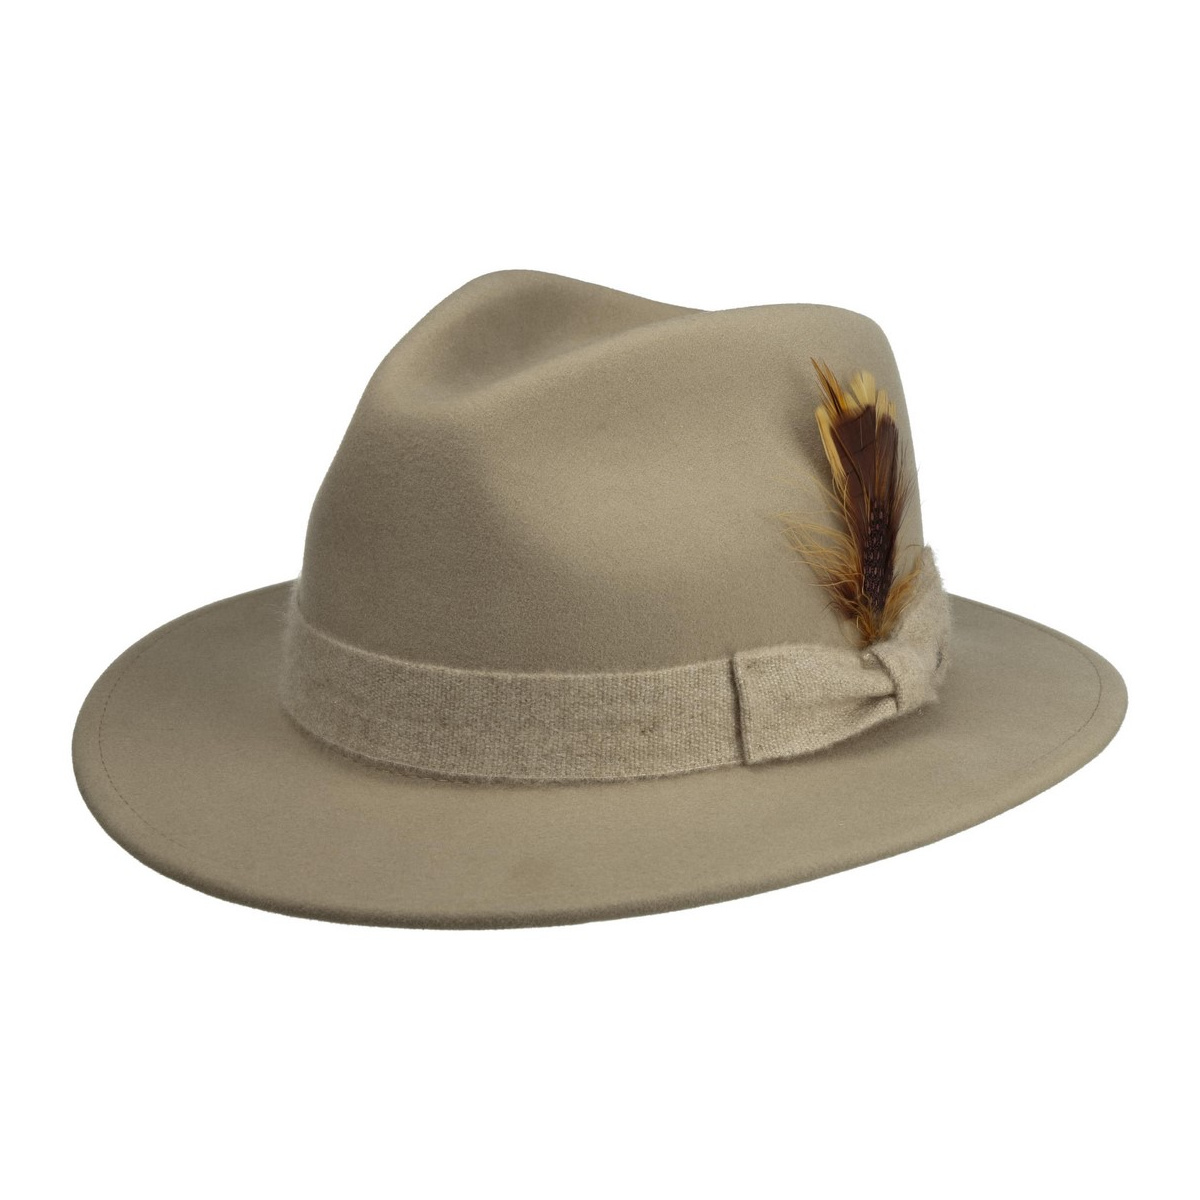 rocklin hat wool marron -stetson Reference : 5610 | Chapellerie Traclet